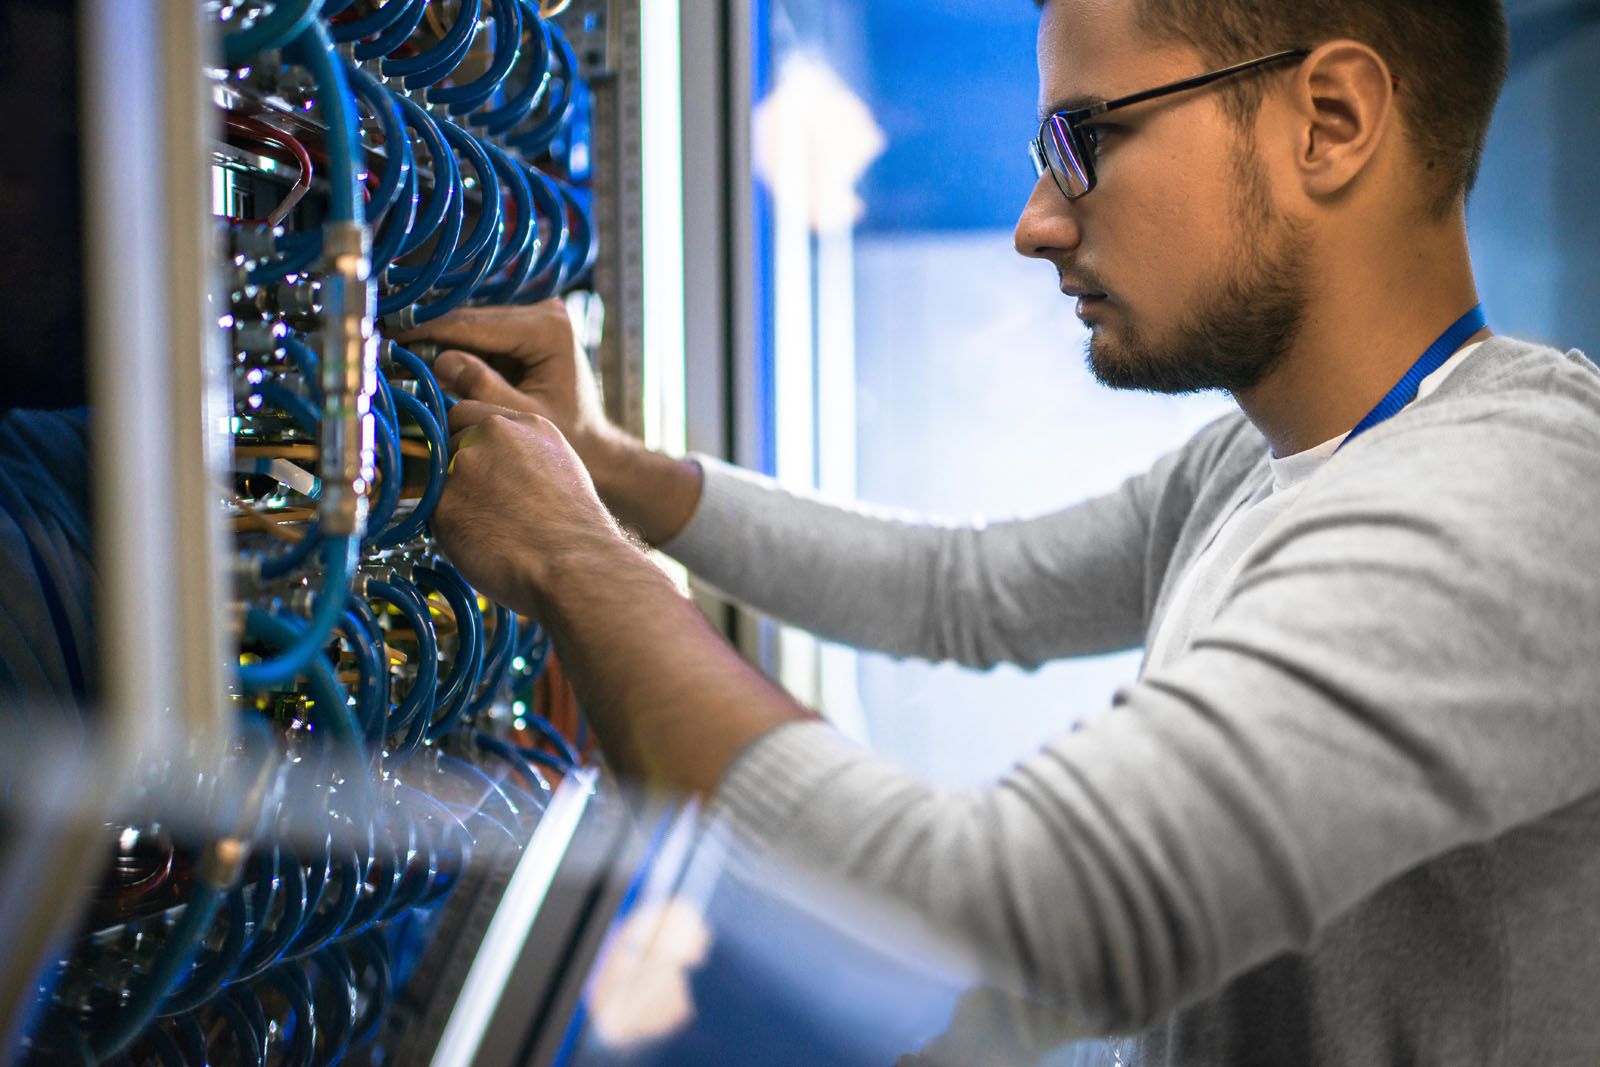 Picture of a male technician with glasses working on wiring a server with blue cables.